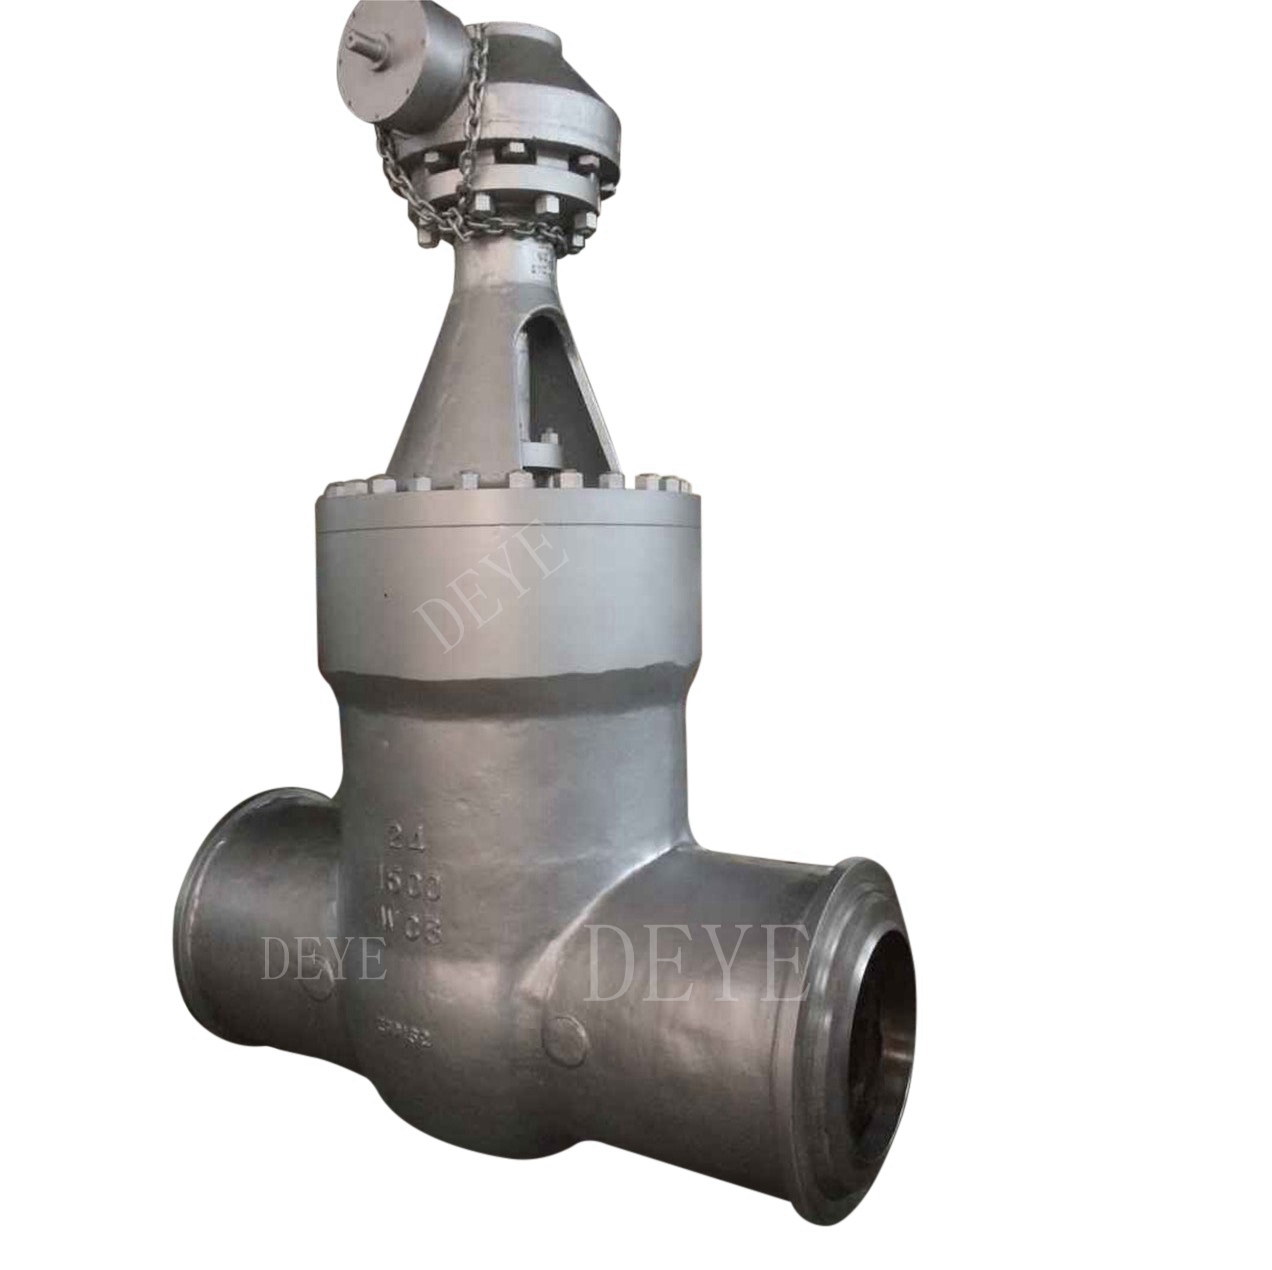 Leading Manufacturer for Flanged Reducing Bore Valve - WCB 24inch 1500LBS BW big Gate Valve GVC-001500-W – Deye